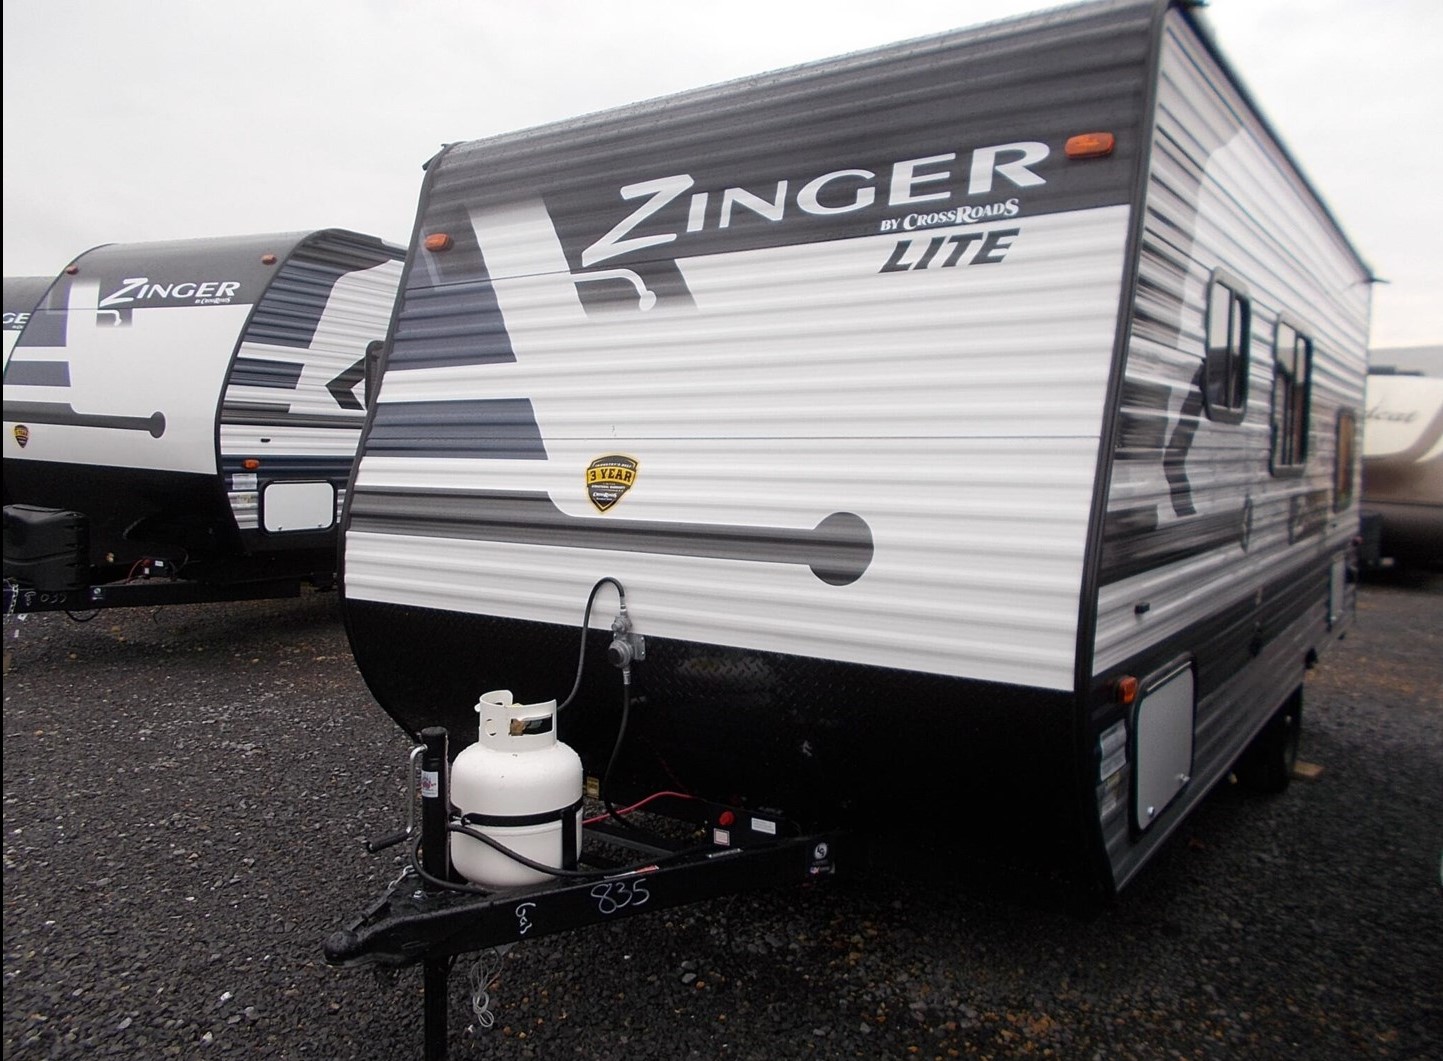 A Zinger Lite by CrossRoads, one of our tiny camper manufacturers, on the lot at our dealership.